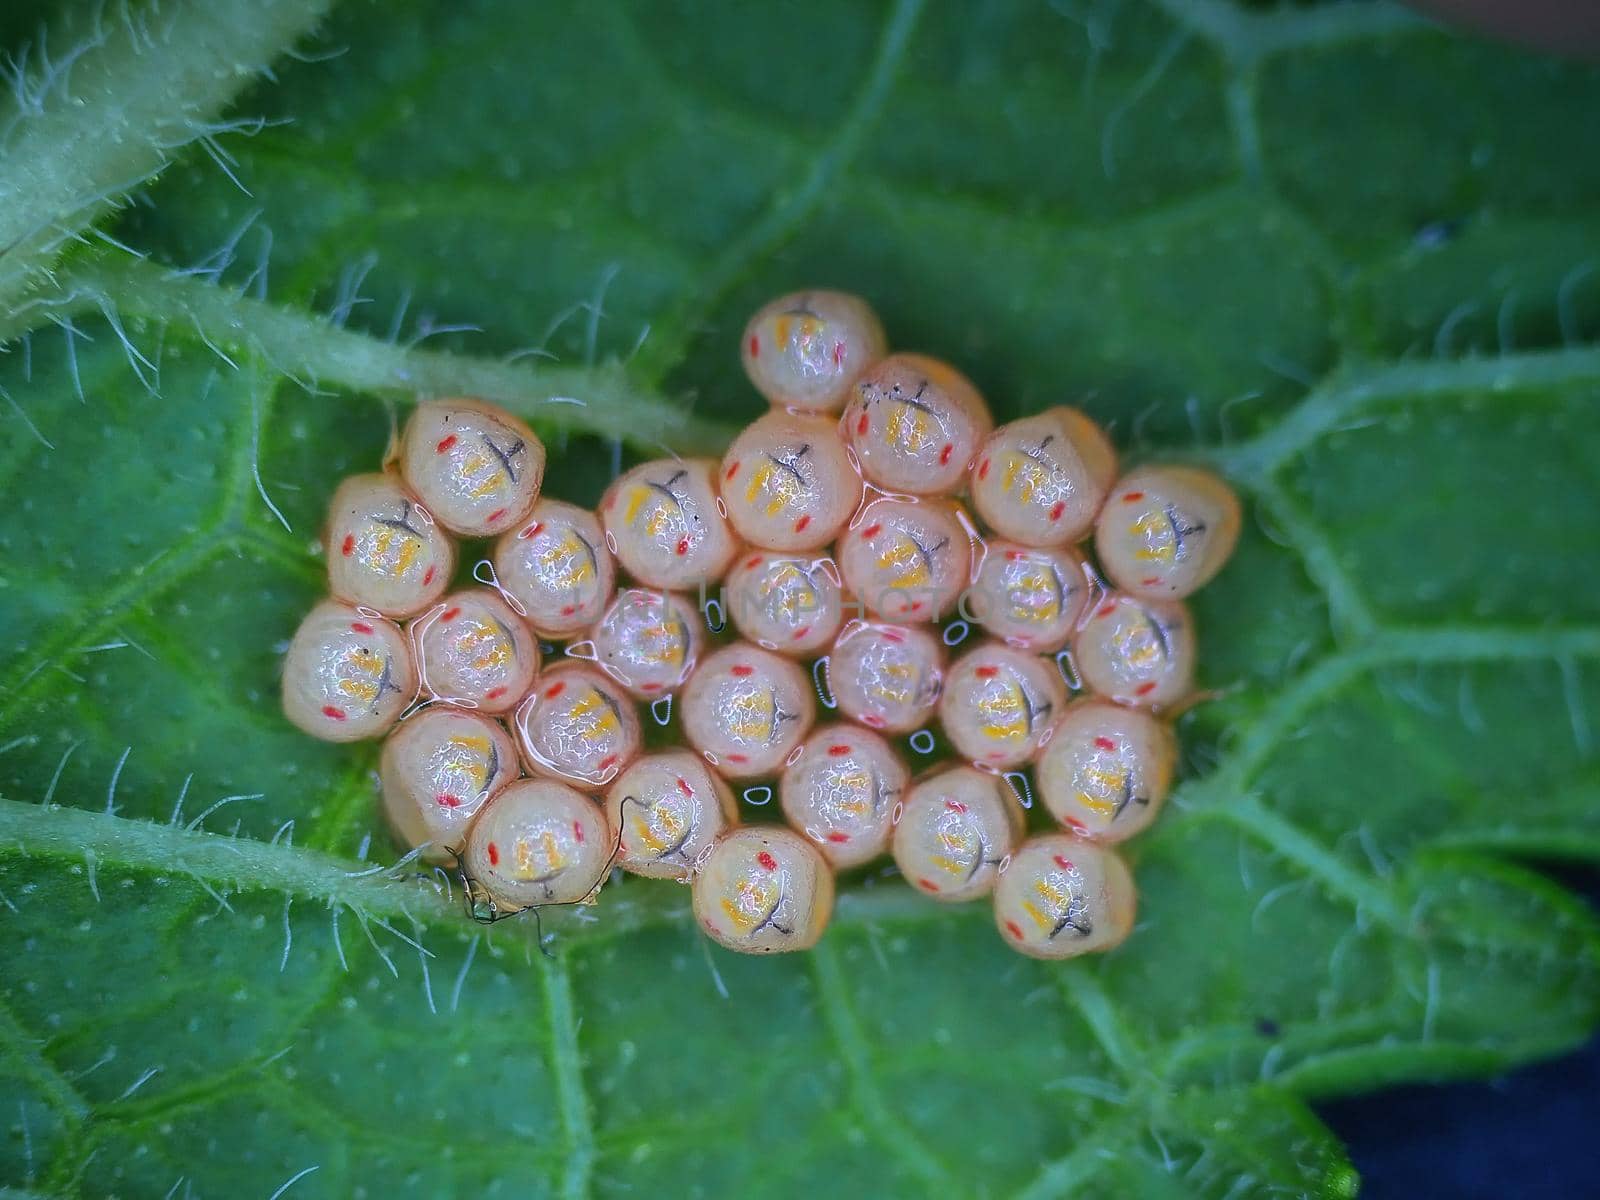 leaf with eggs of a butterfly